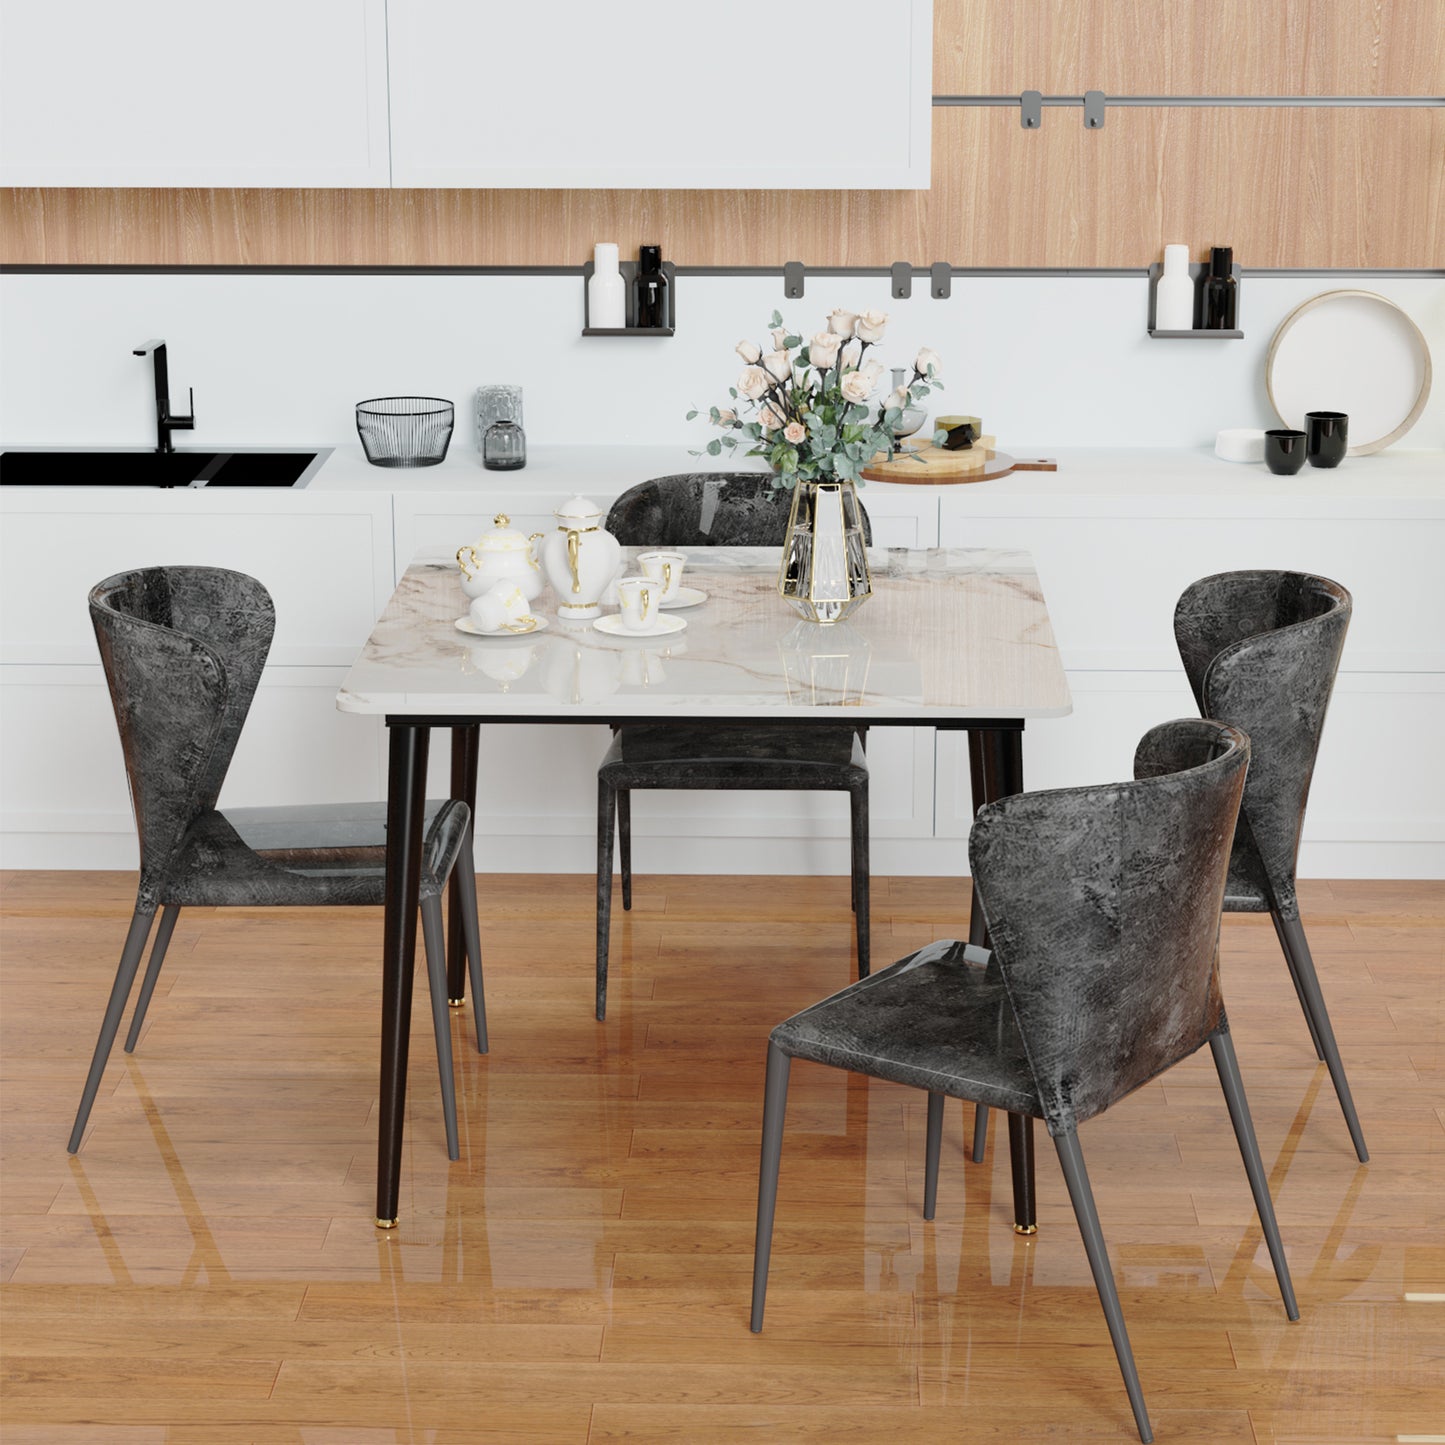 Luxury Kitchen Dining Table for Dining Room